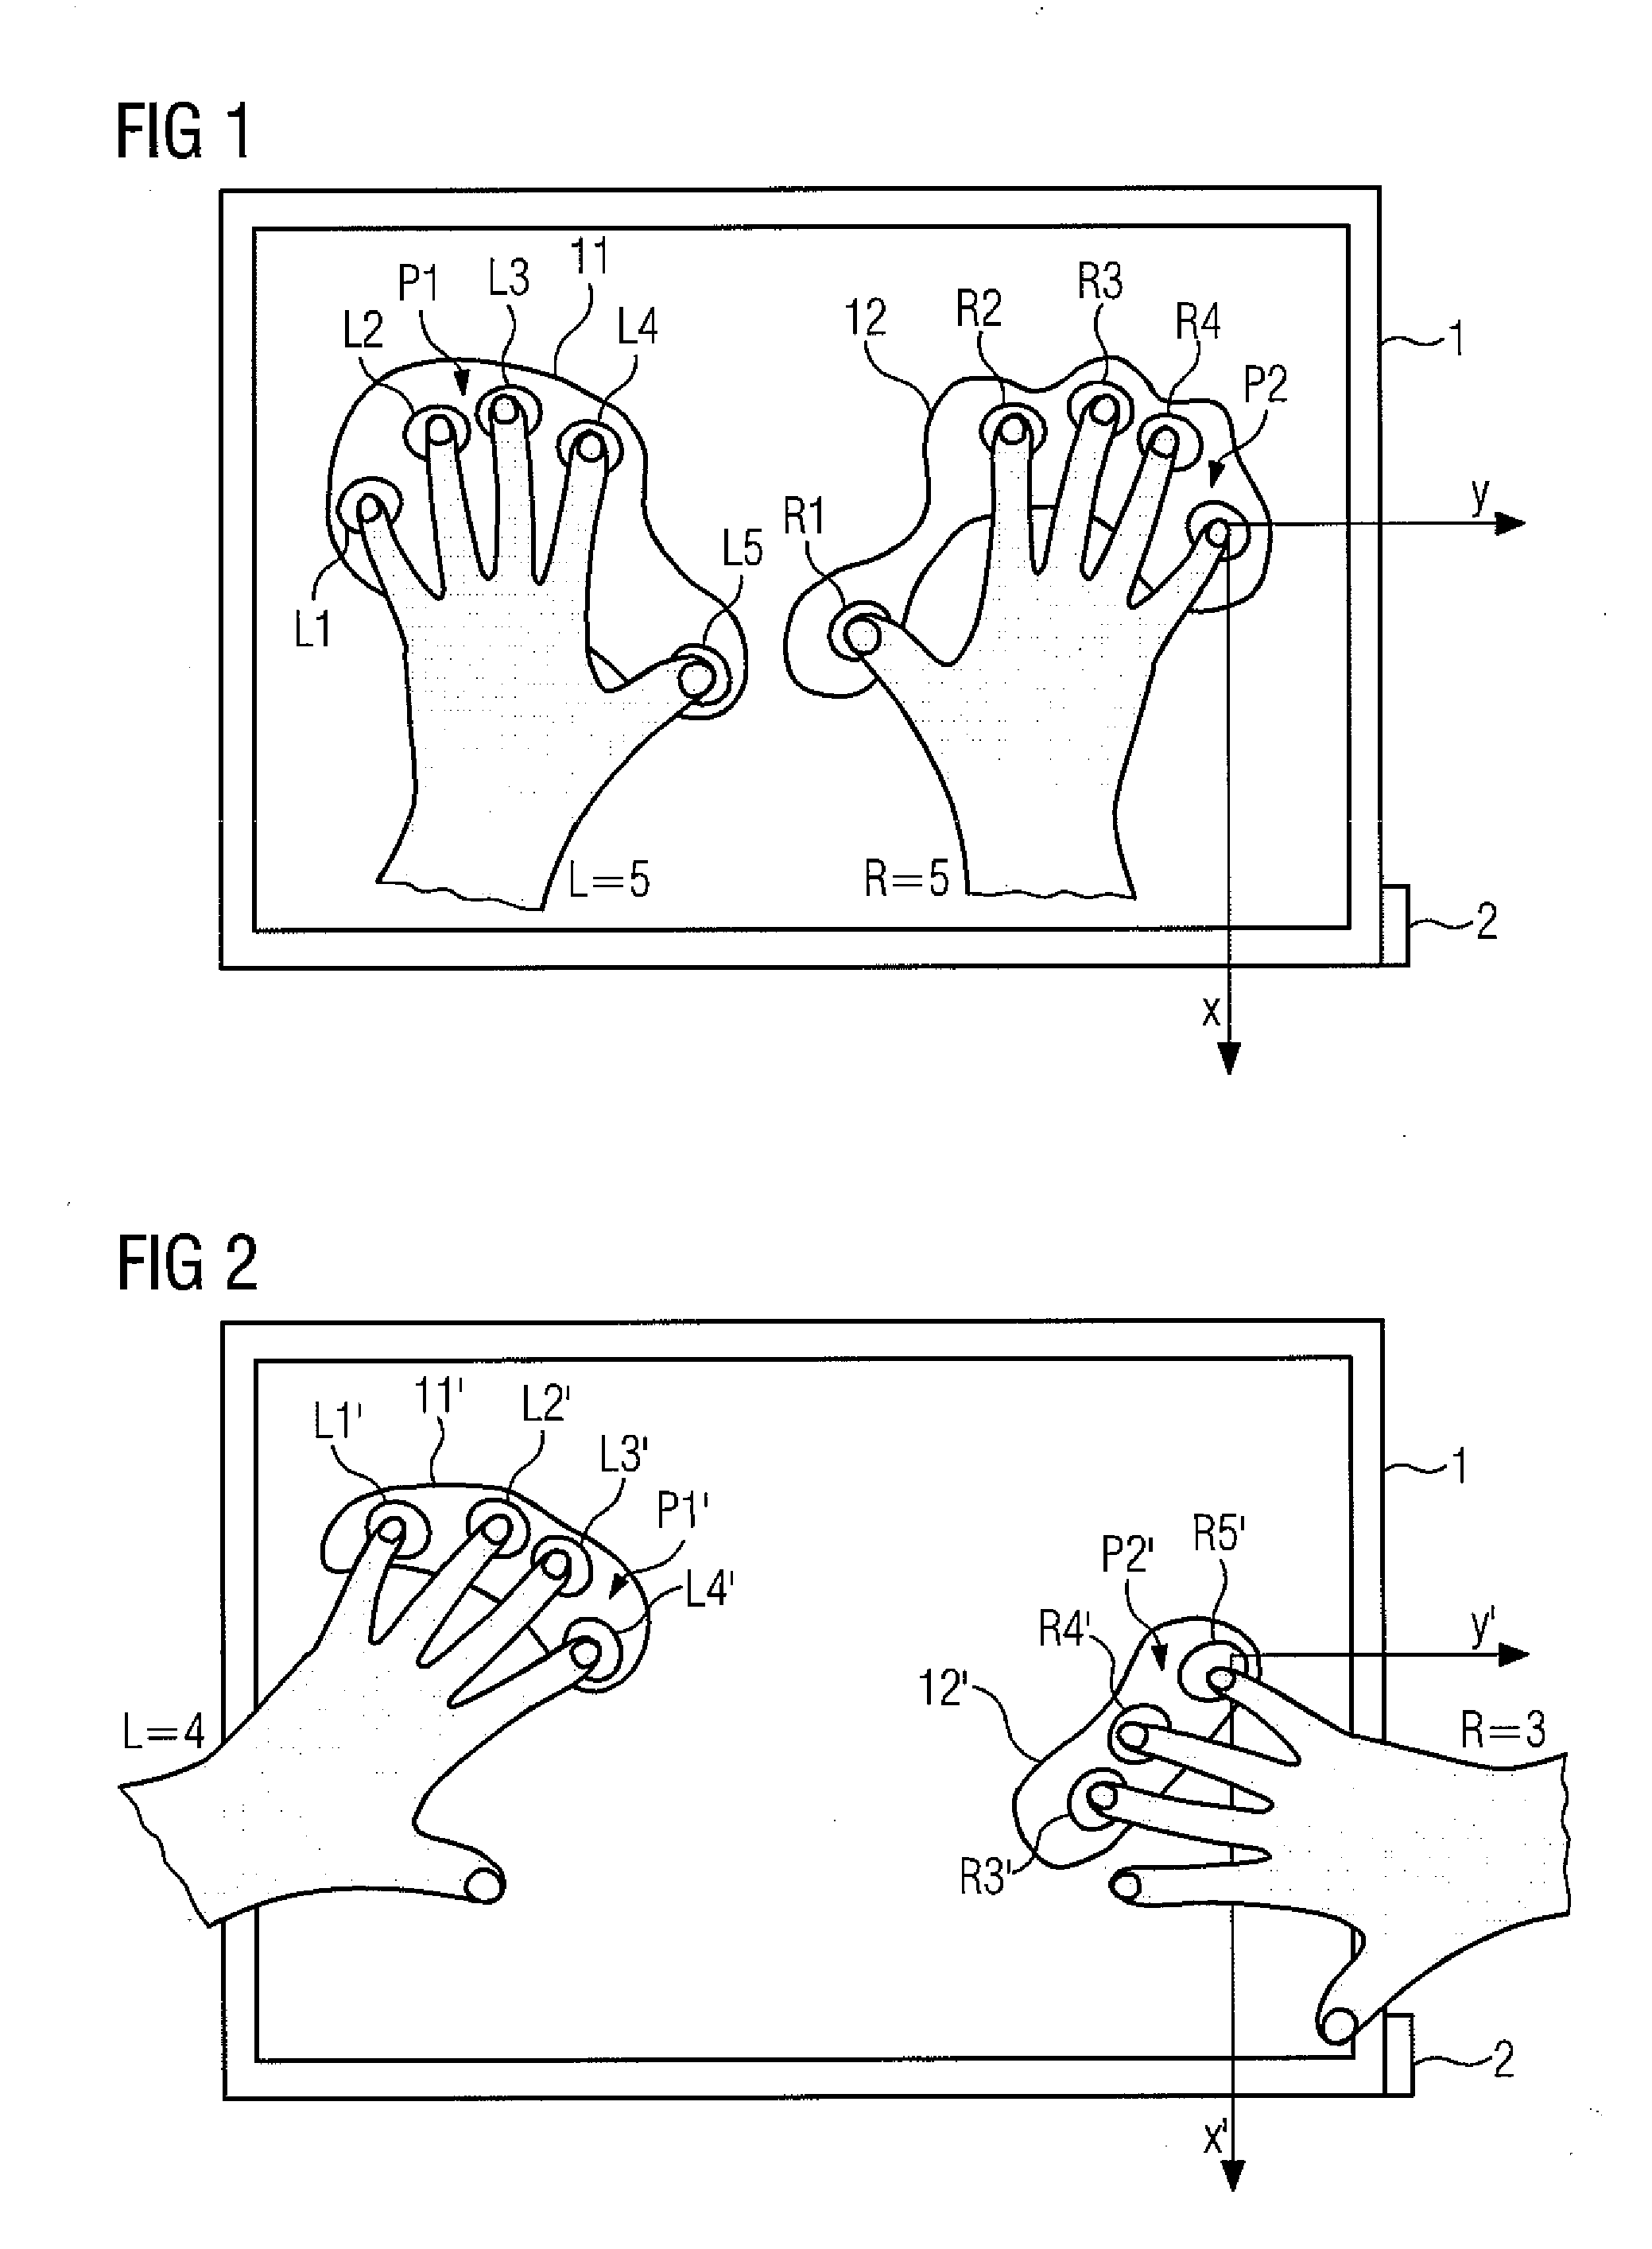 Method of Operating an Operator Control and Monitoring Device for Safety-Critical Applications